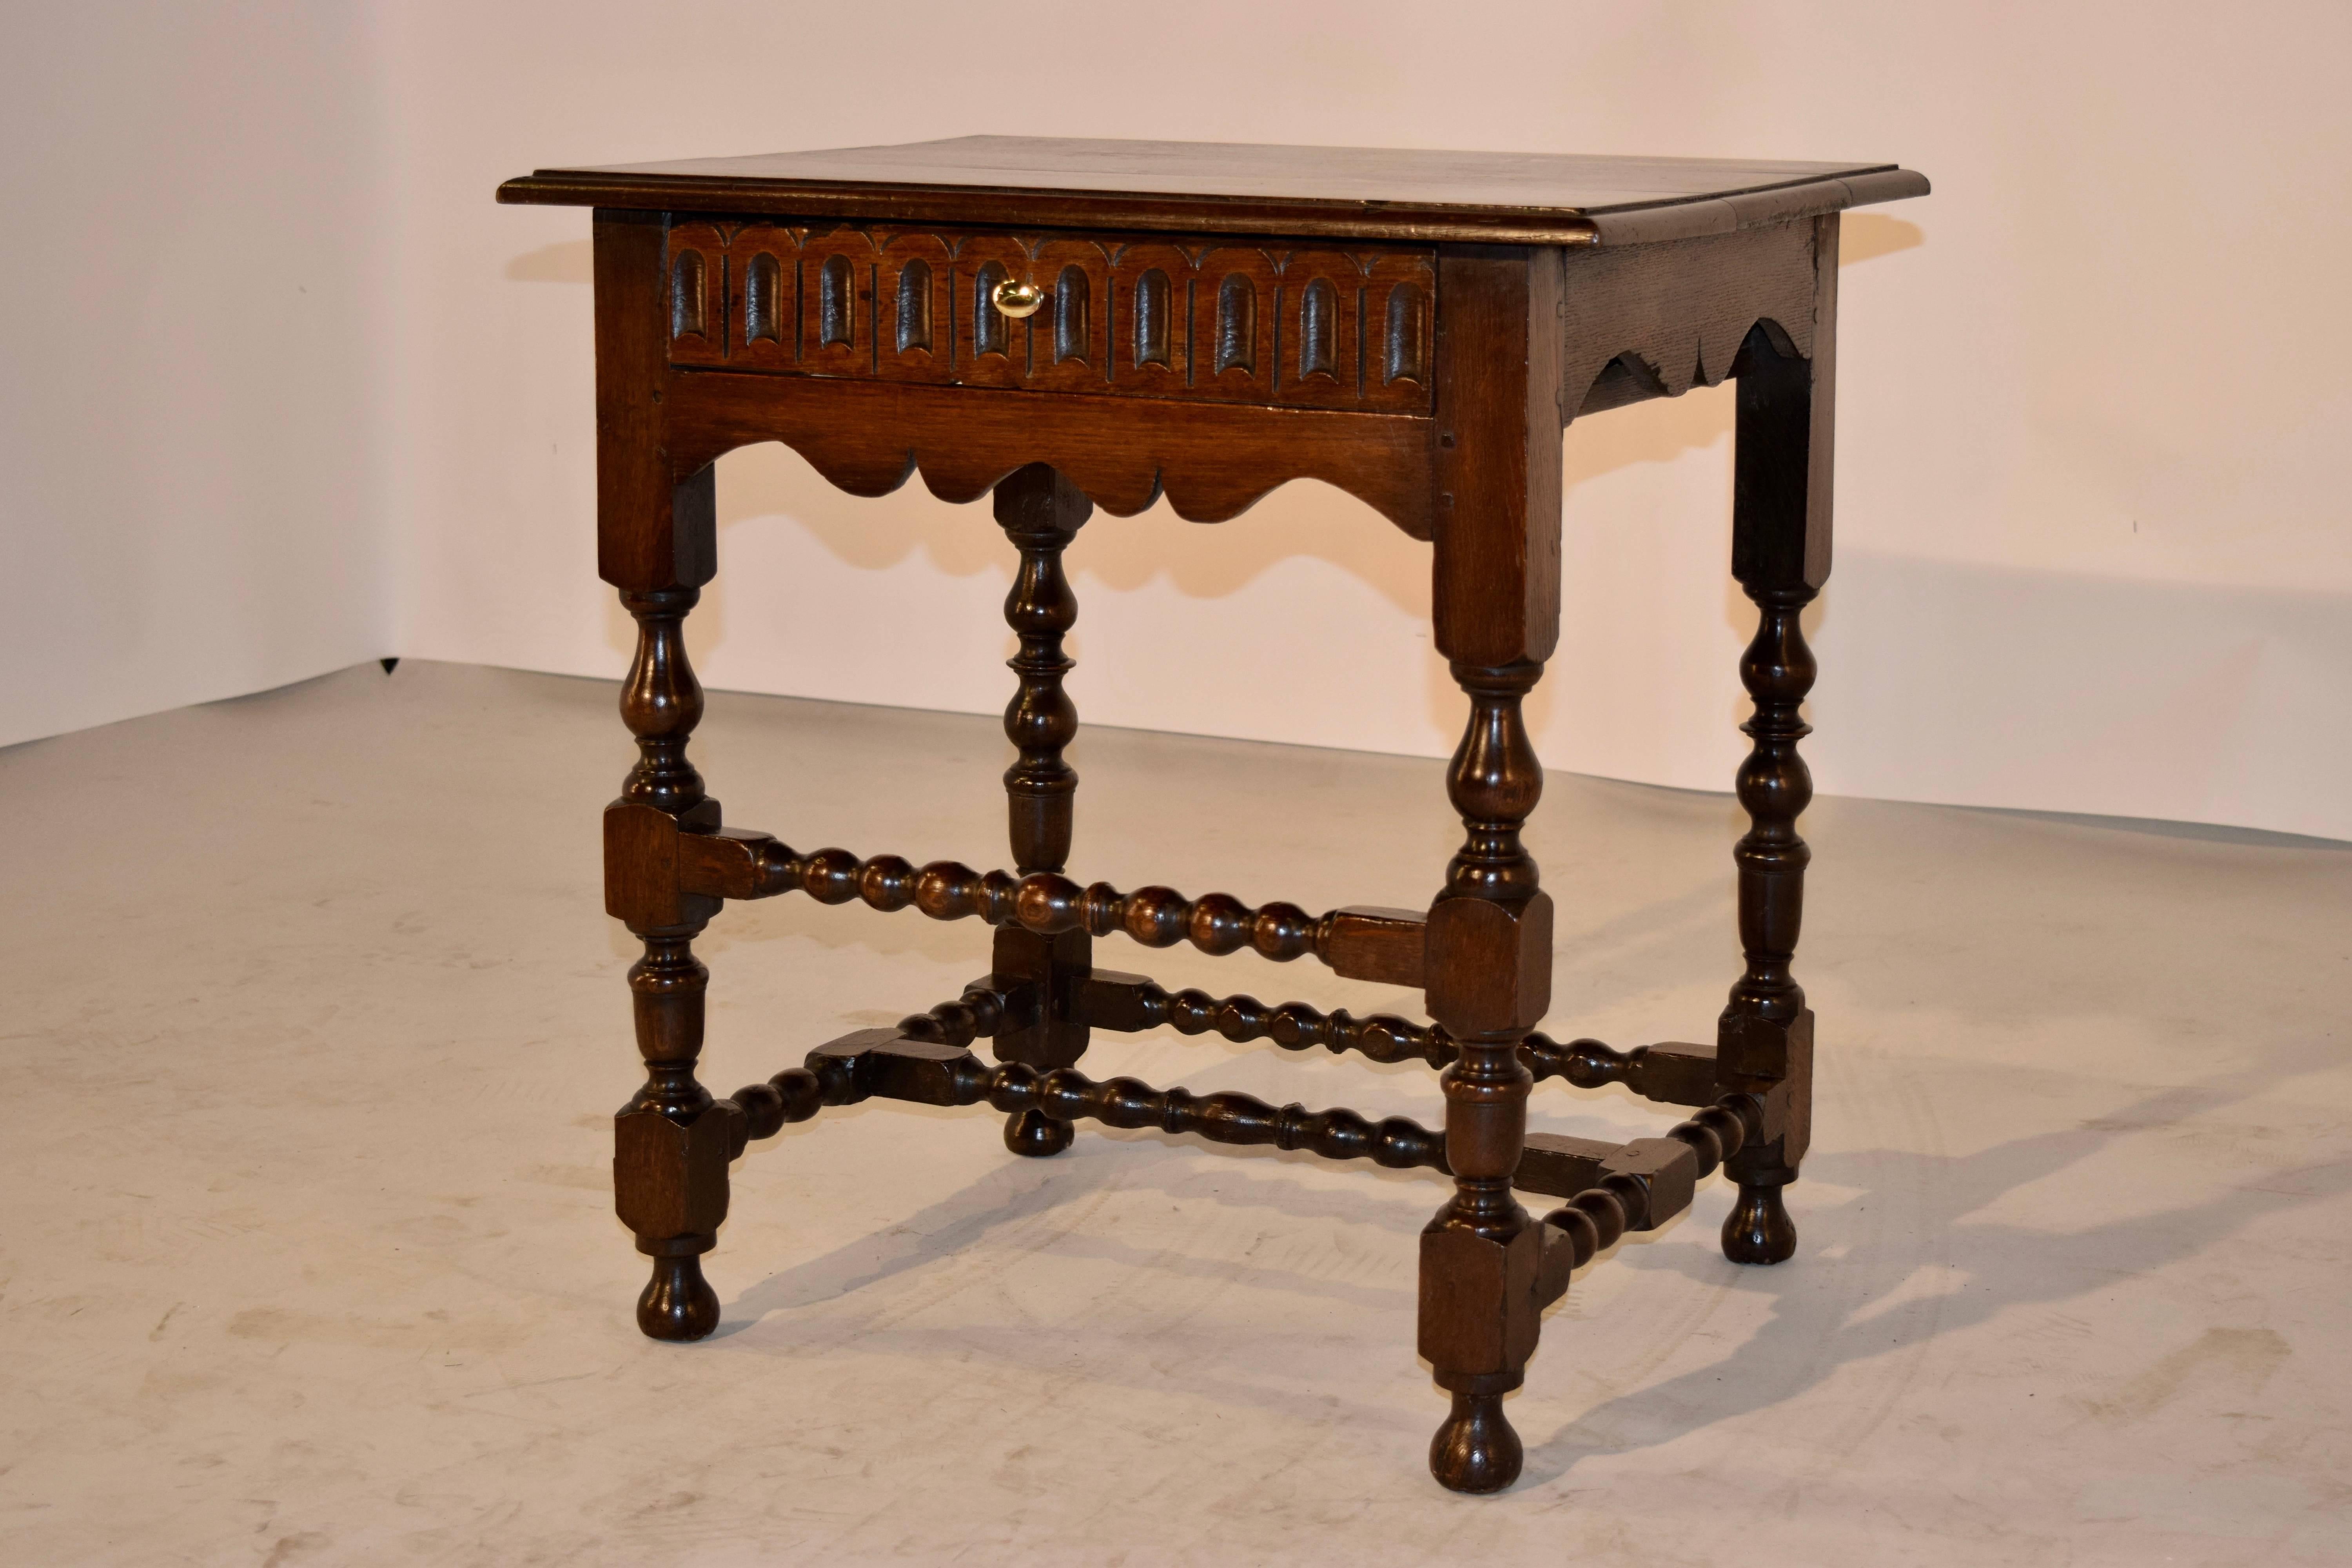 19th Century English oak side table with a beveled edge around the top following down to a single drawer with a carved drawer front and a scalloped apron. The legs are hand-turned and have complimenting turned stretchers and it is raised on turned